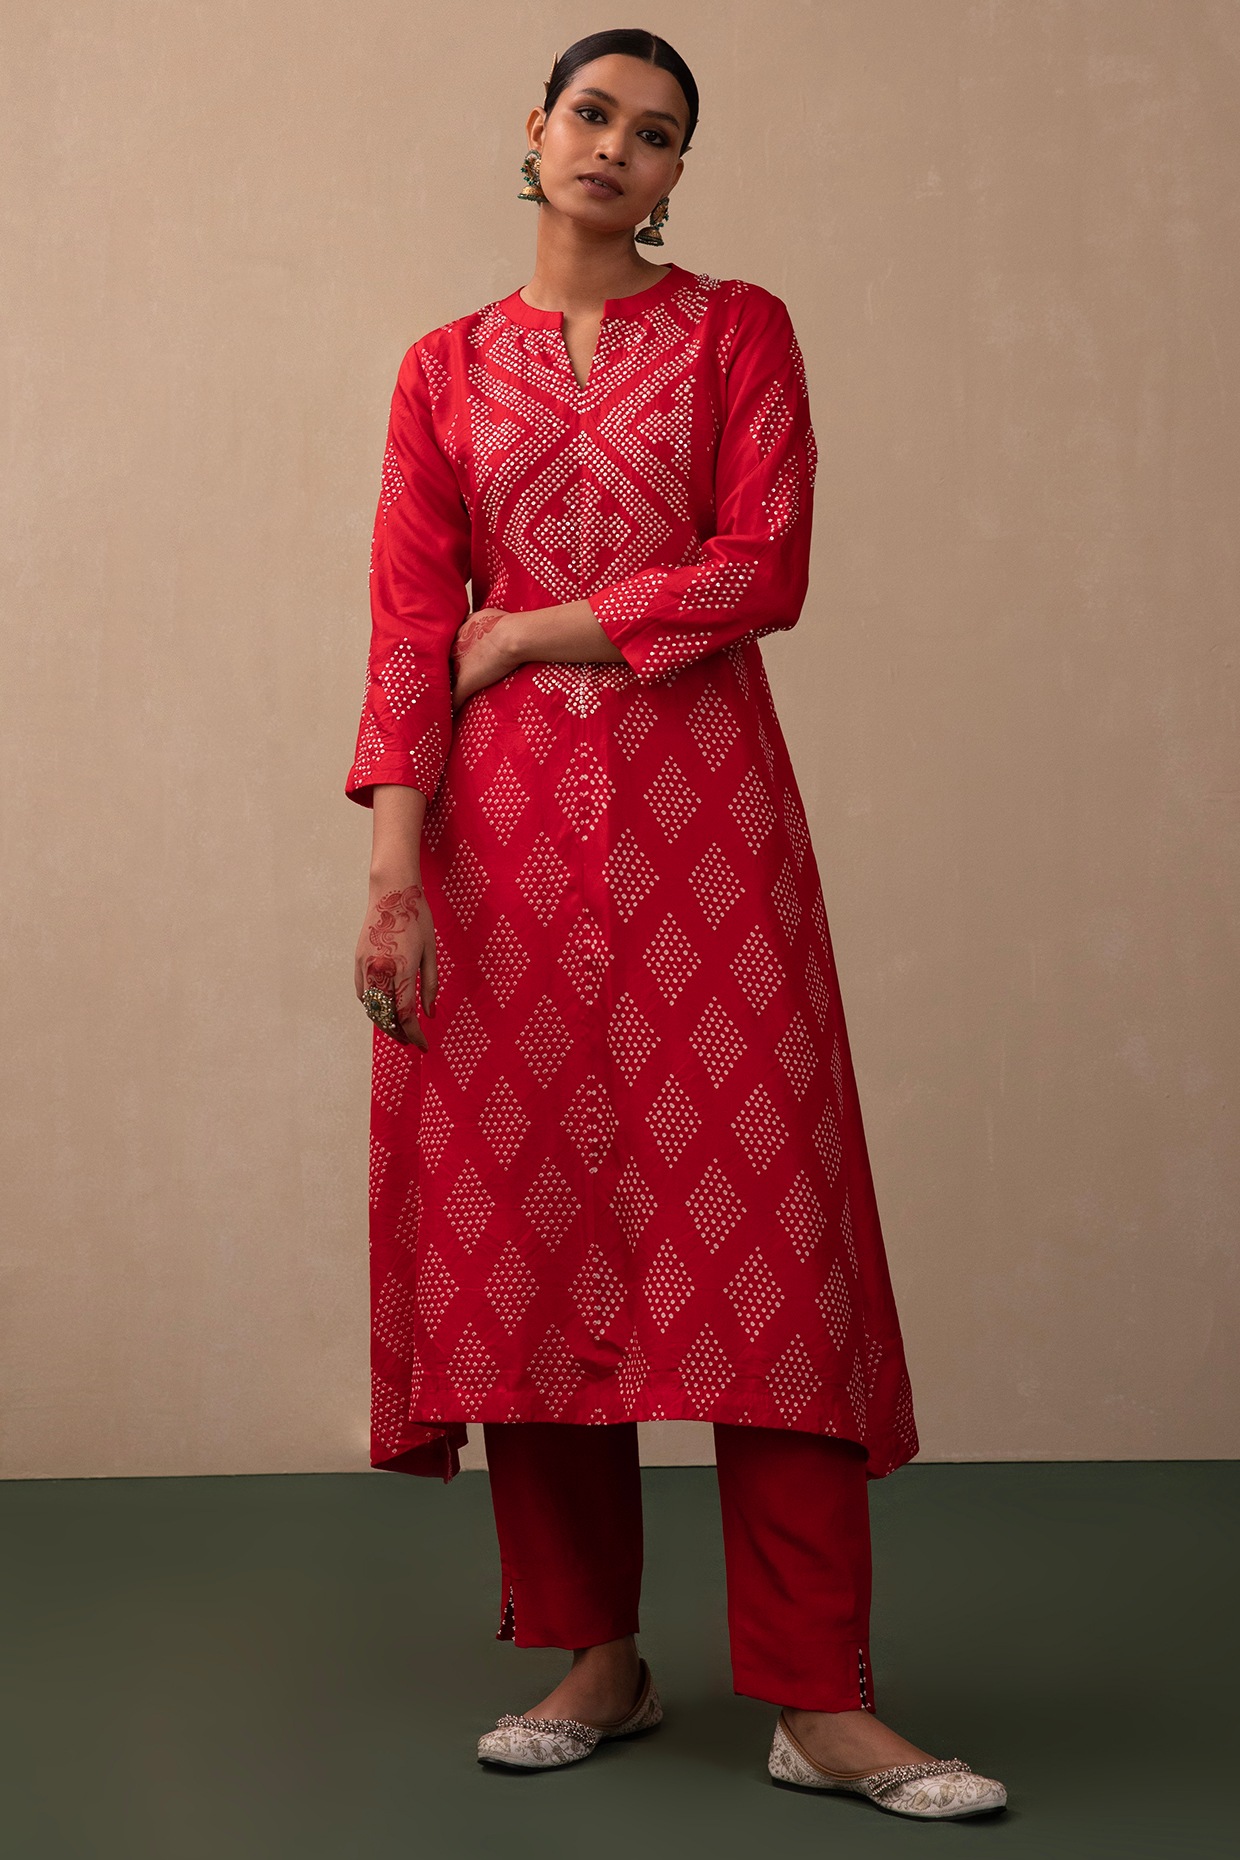 Bandhani kurtis - All about beginning, specifications, trends, making  process and 3 best types of bandhani kurtis